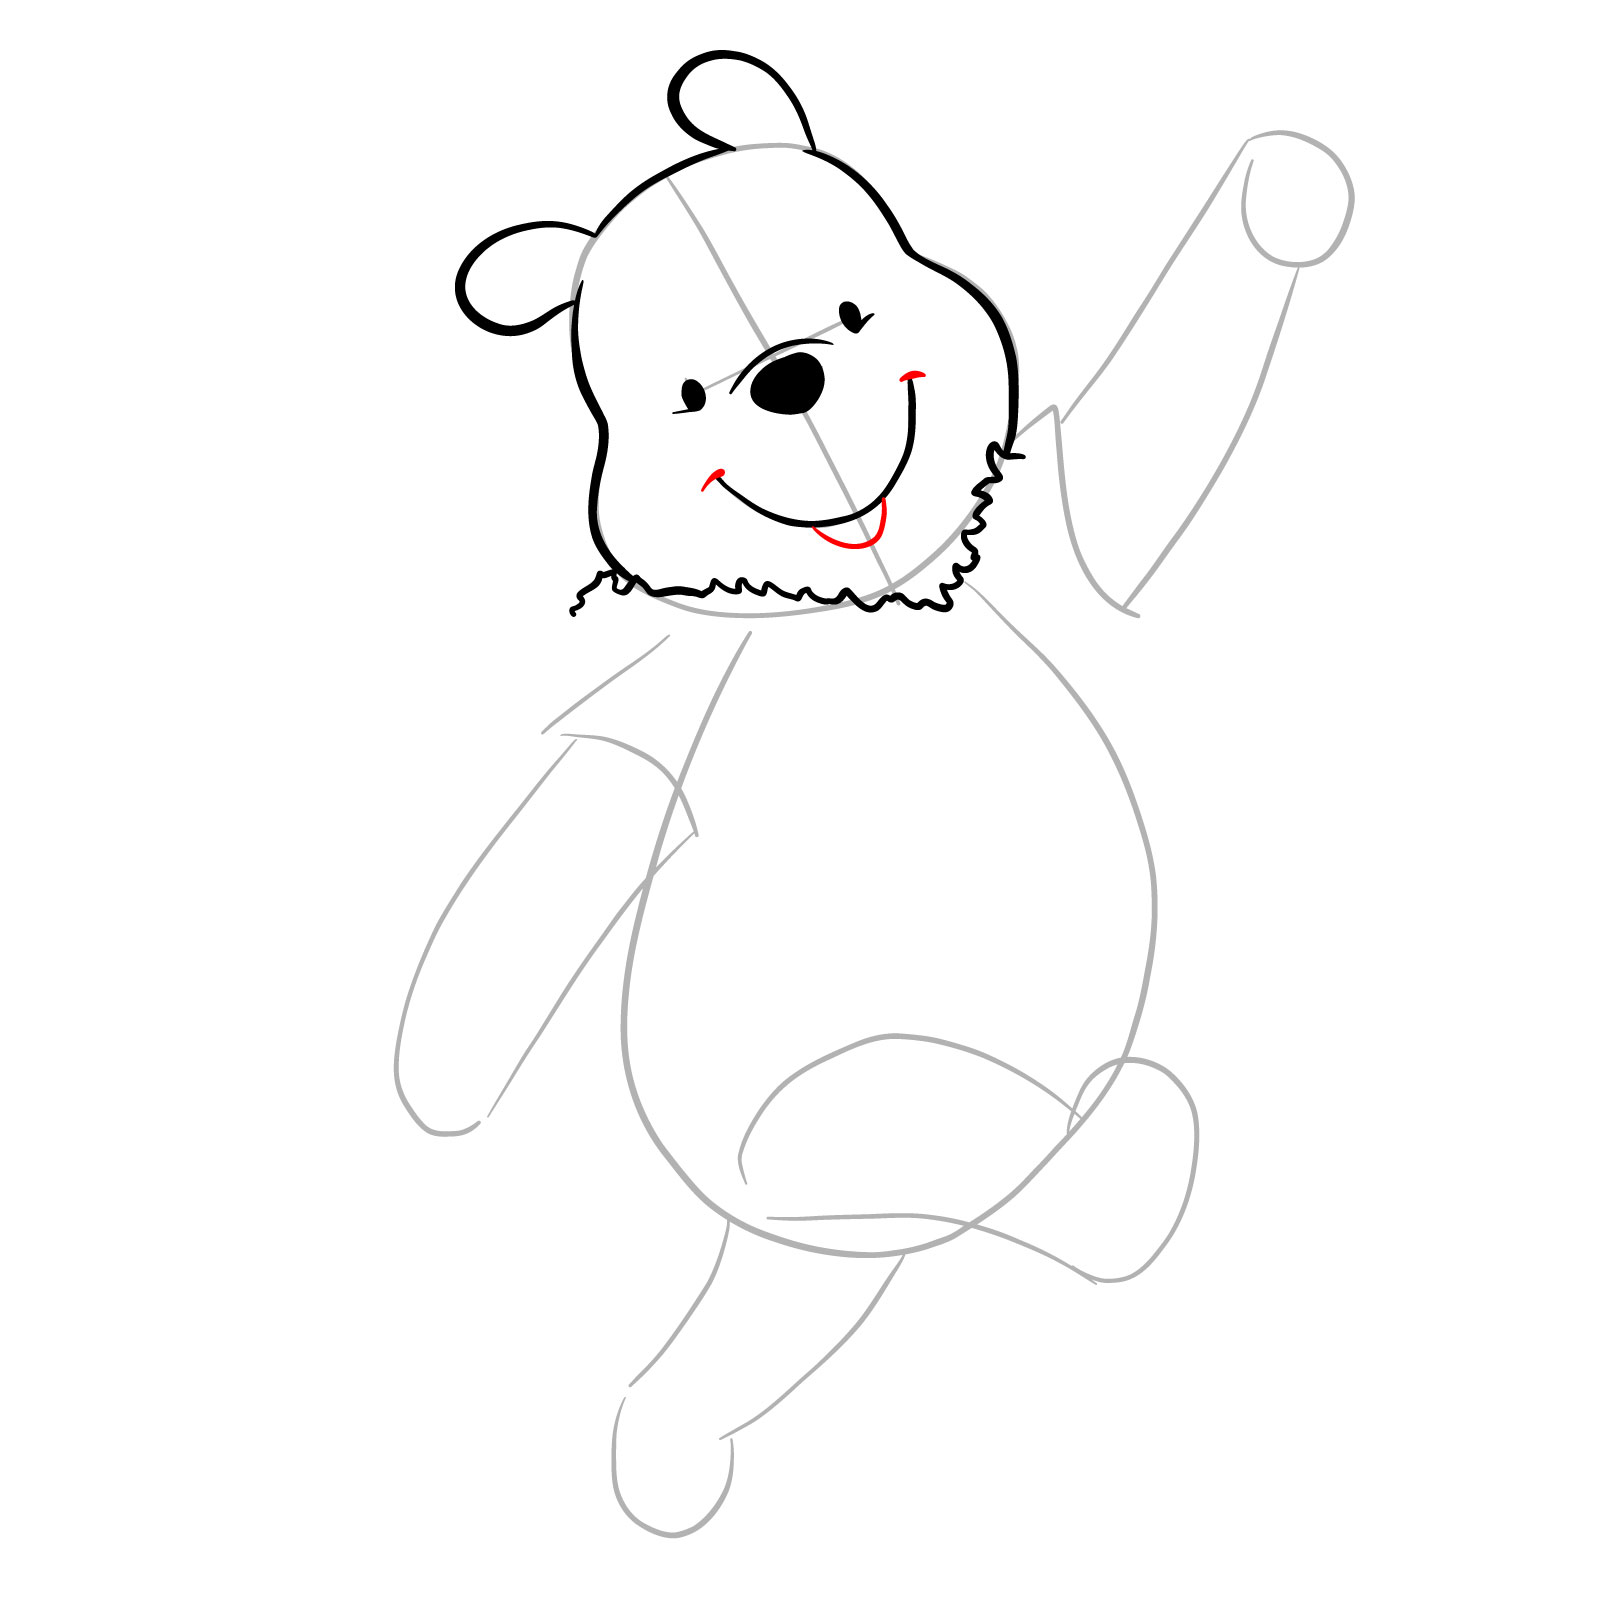 How to draw Winnie-the-Pooh Christmas style - step 09